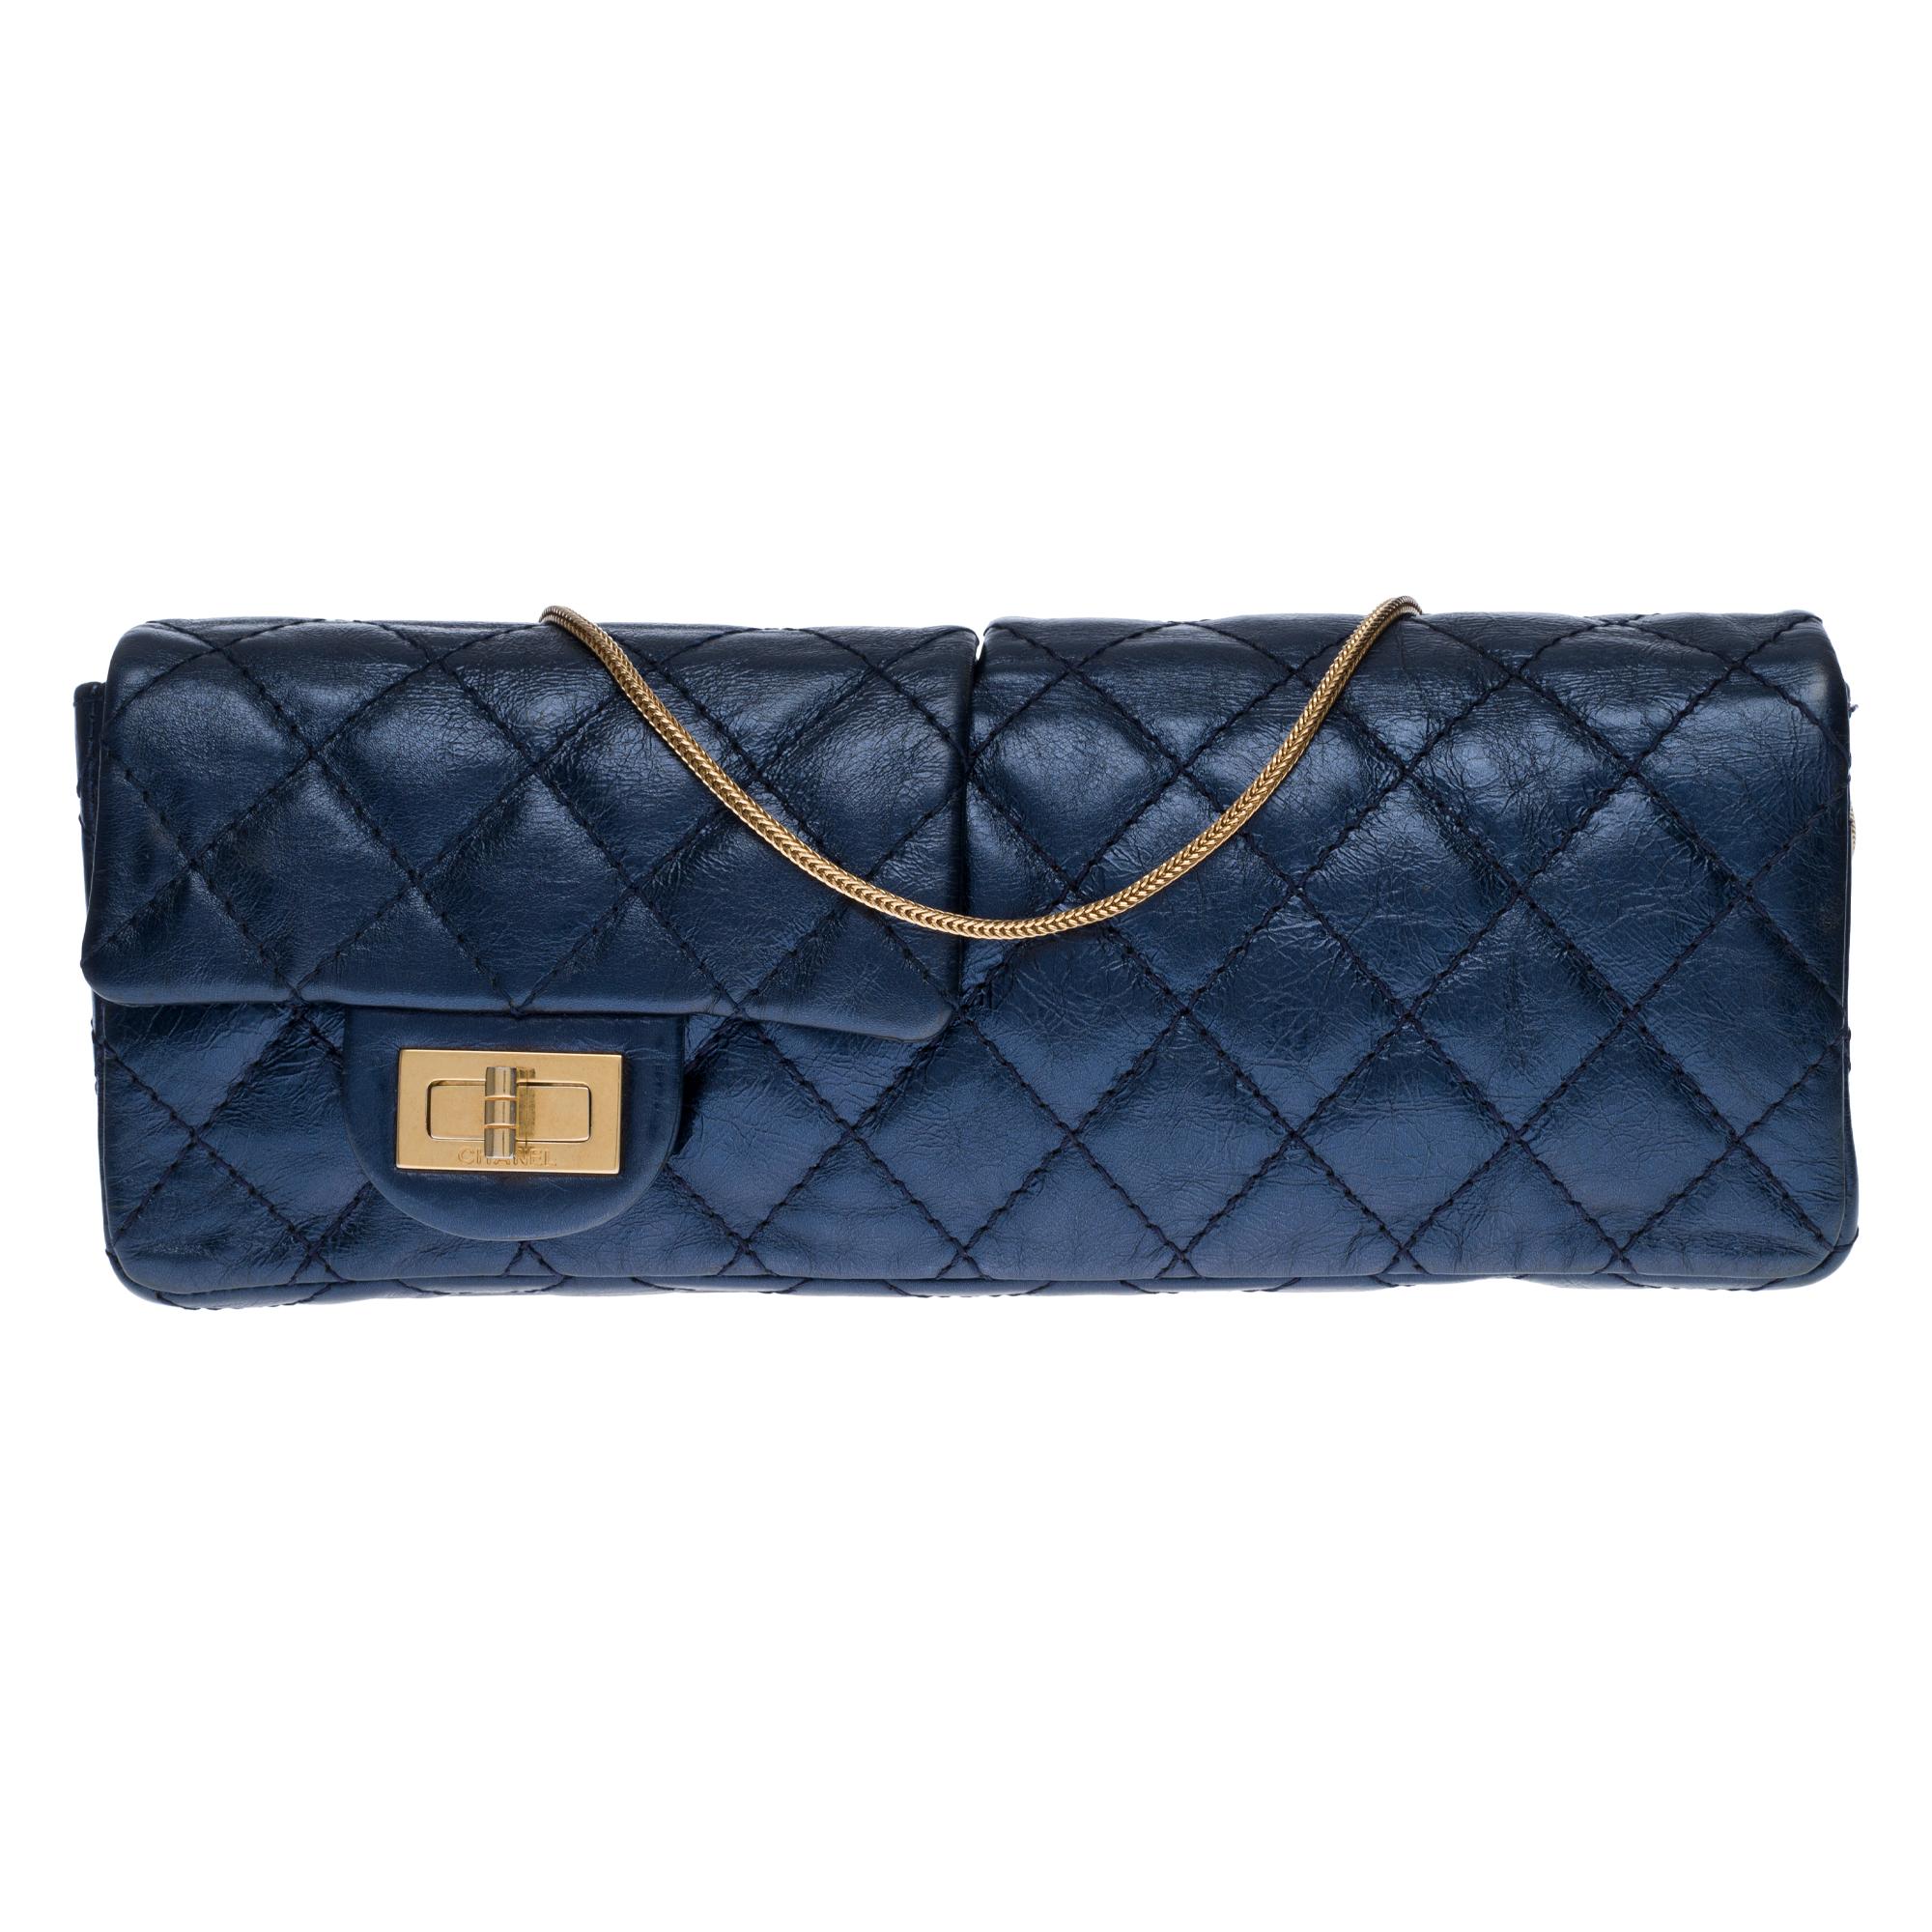 Rare CHANEL 2.55 double-sided metallic blue quilted leather